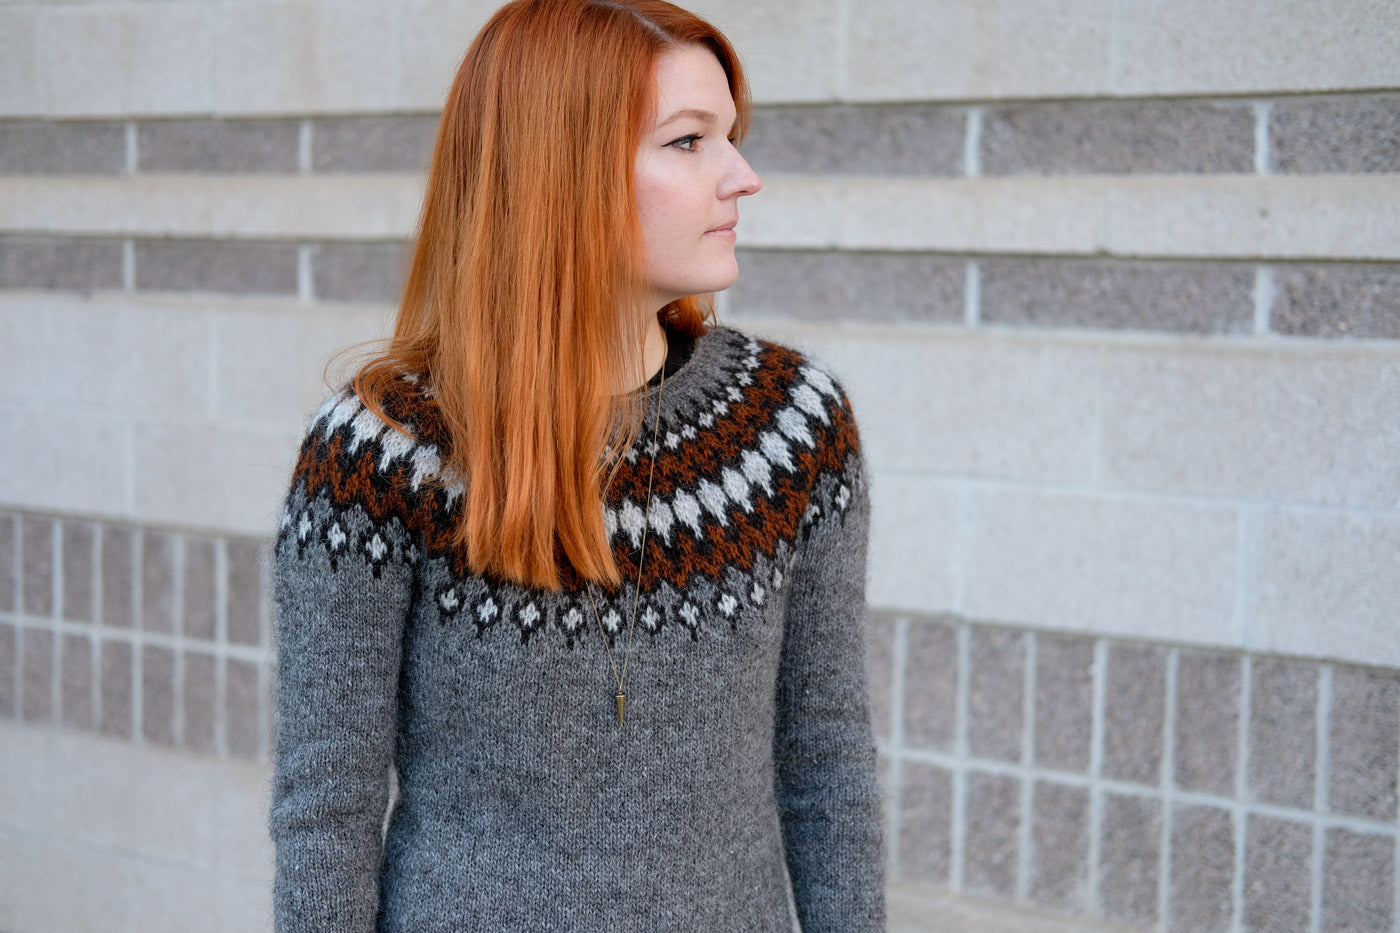 Lauren in her grey and red colorwork pullover sweater